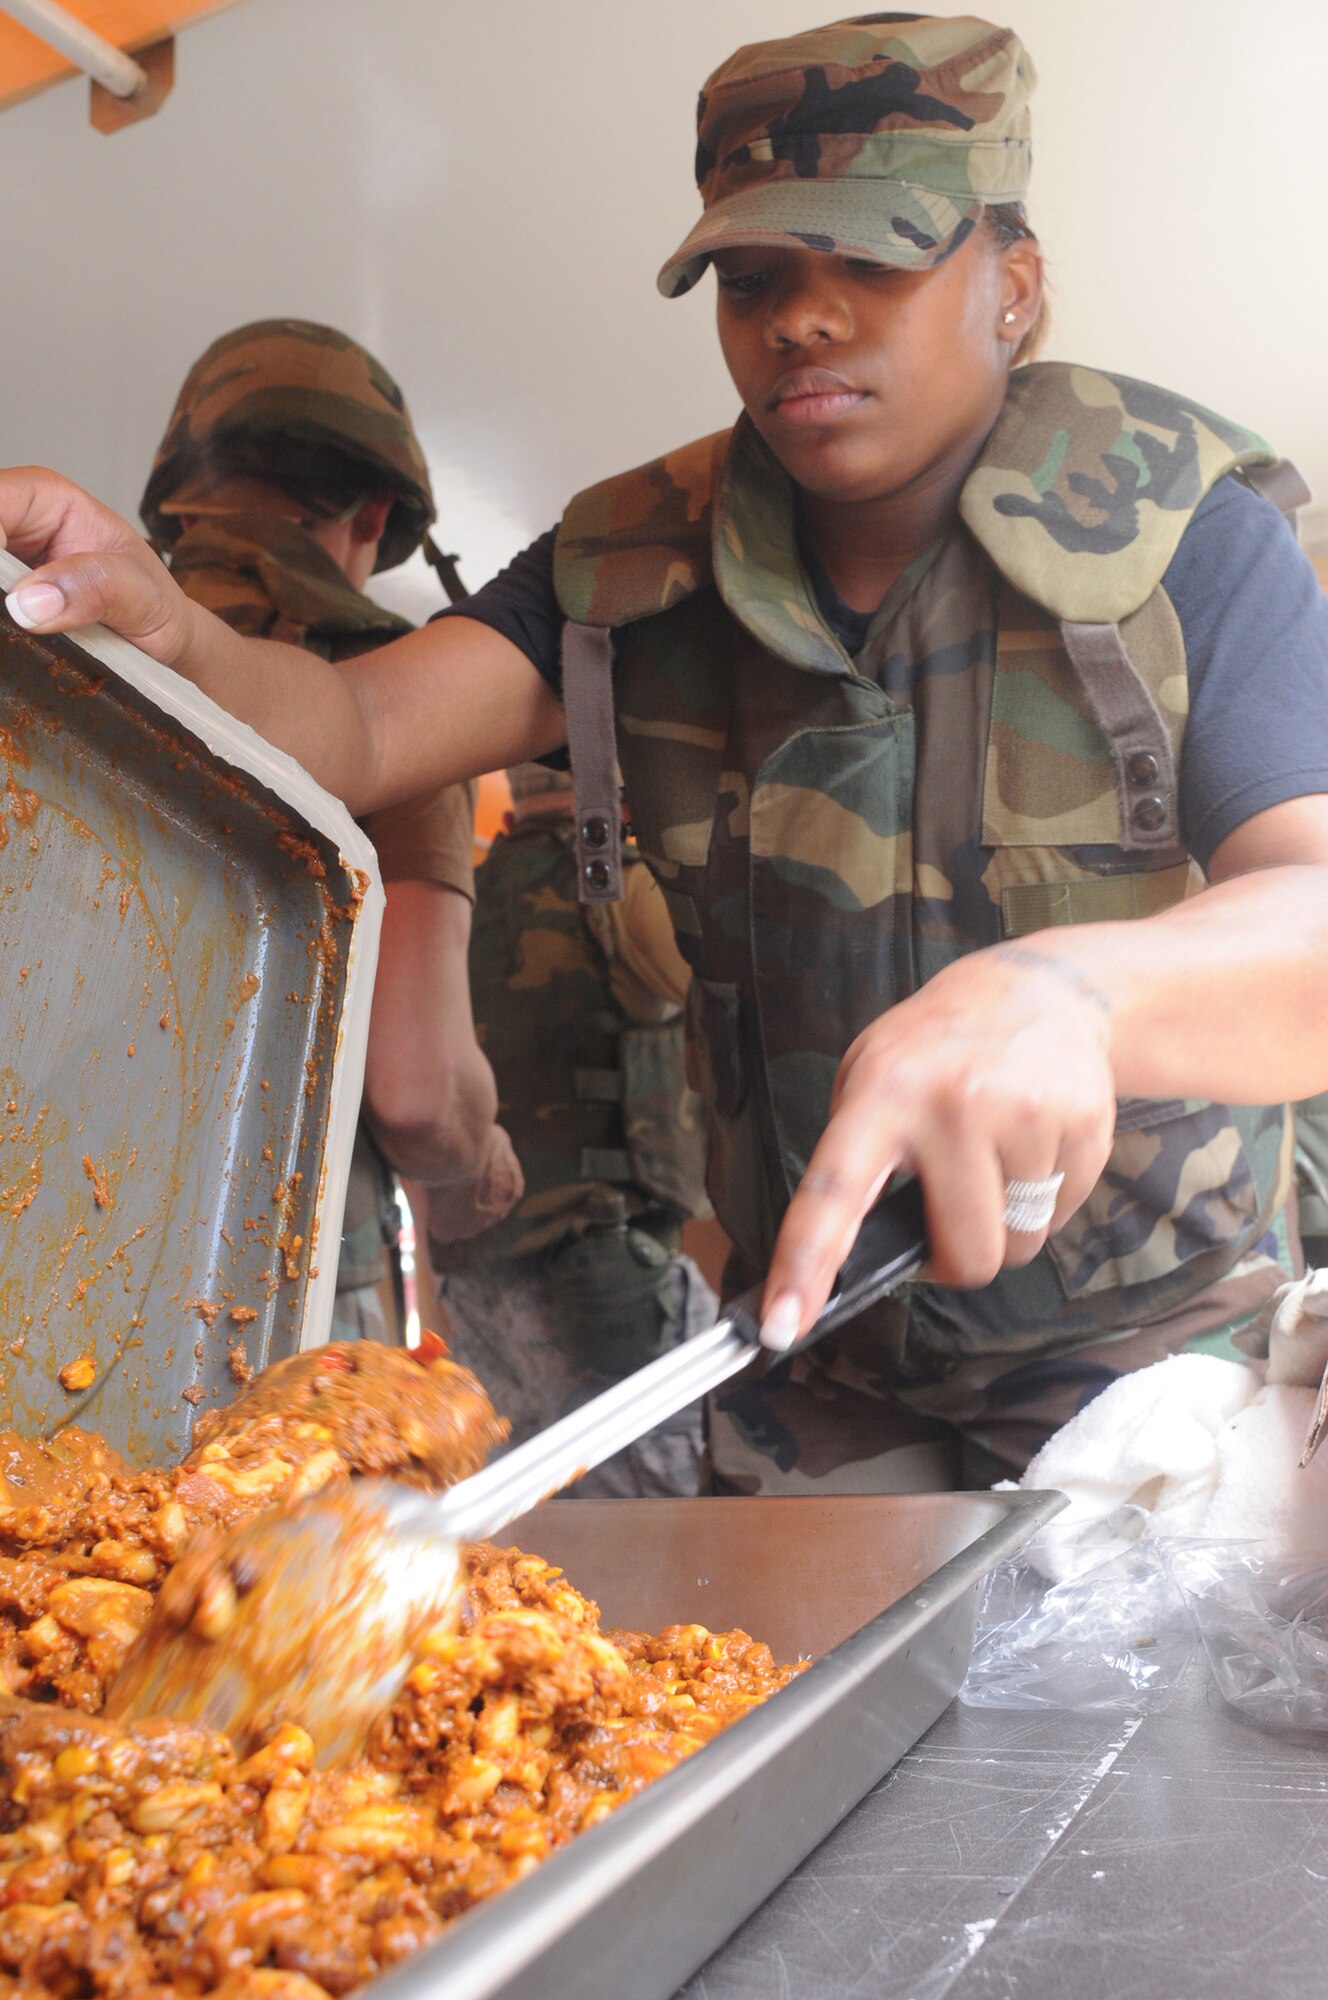 Staff Sgt. Vilynthia Hawkins, 86th Services Squadron, Ramstein Air Base, Germany, prepares a chili macaroni hot lunch while participating in a week long contingency exercise Silver Flag. There are nine to ten Silver Flag exercises held throughout the year at the 86th Construction Training Squadron, Ramstein Air Base, Germany, and the average class size is 100 to 200 people. (U.S. Air Force photo by: Tech. Sgt. Sean Mateo White)